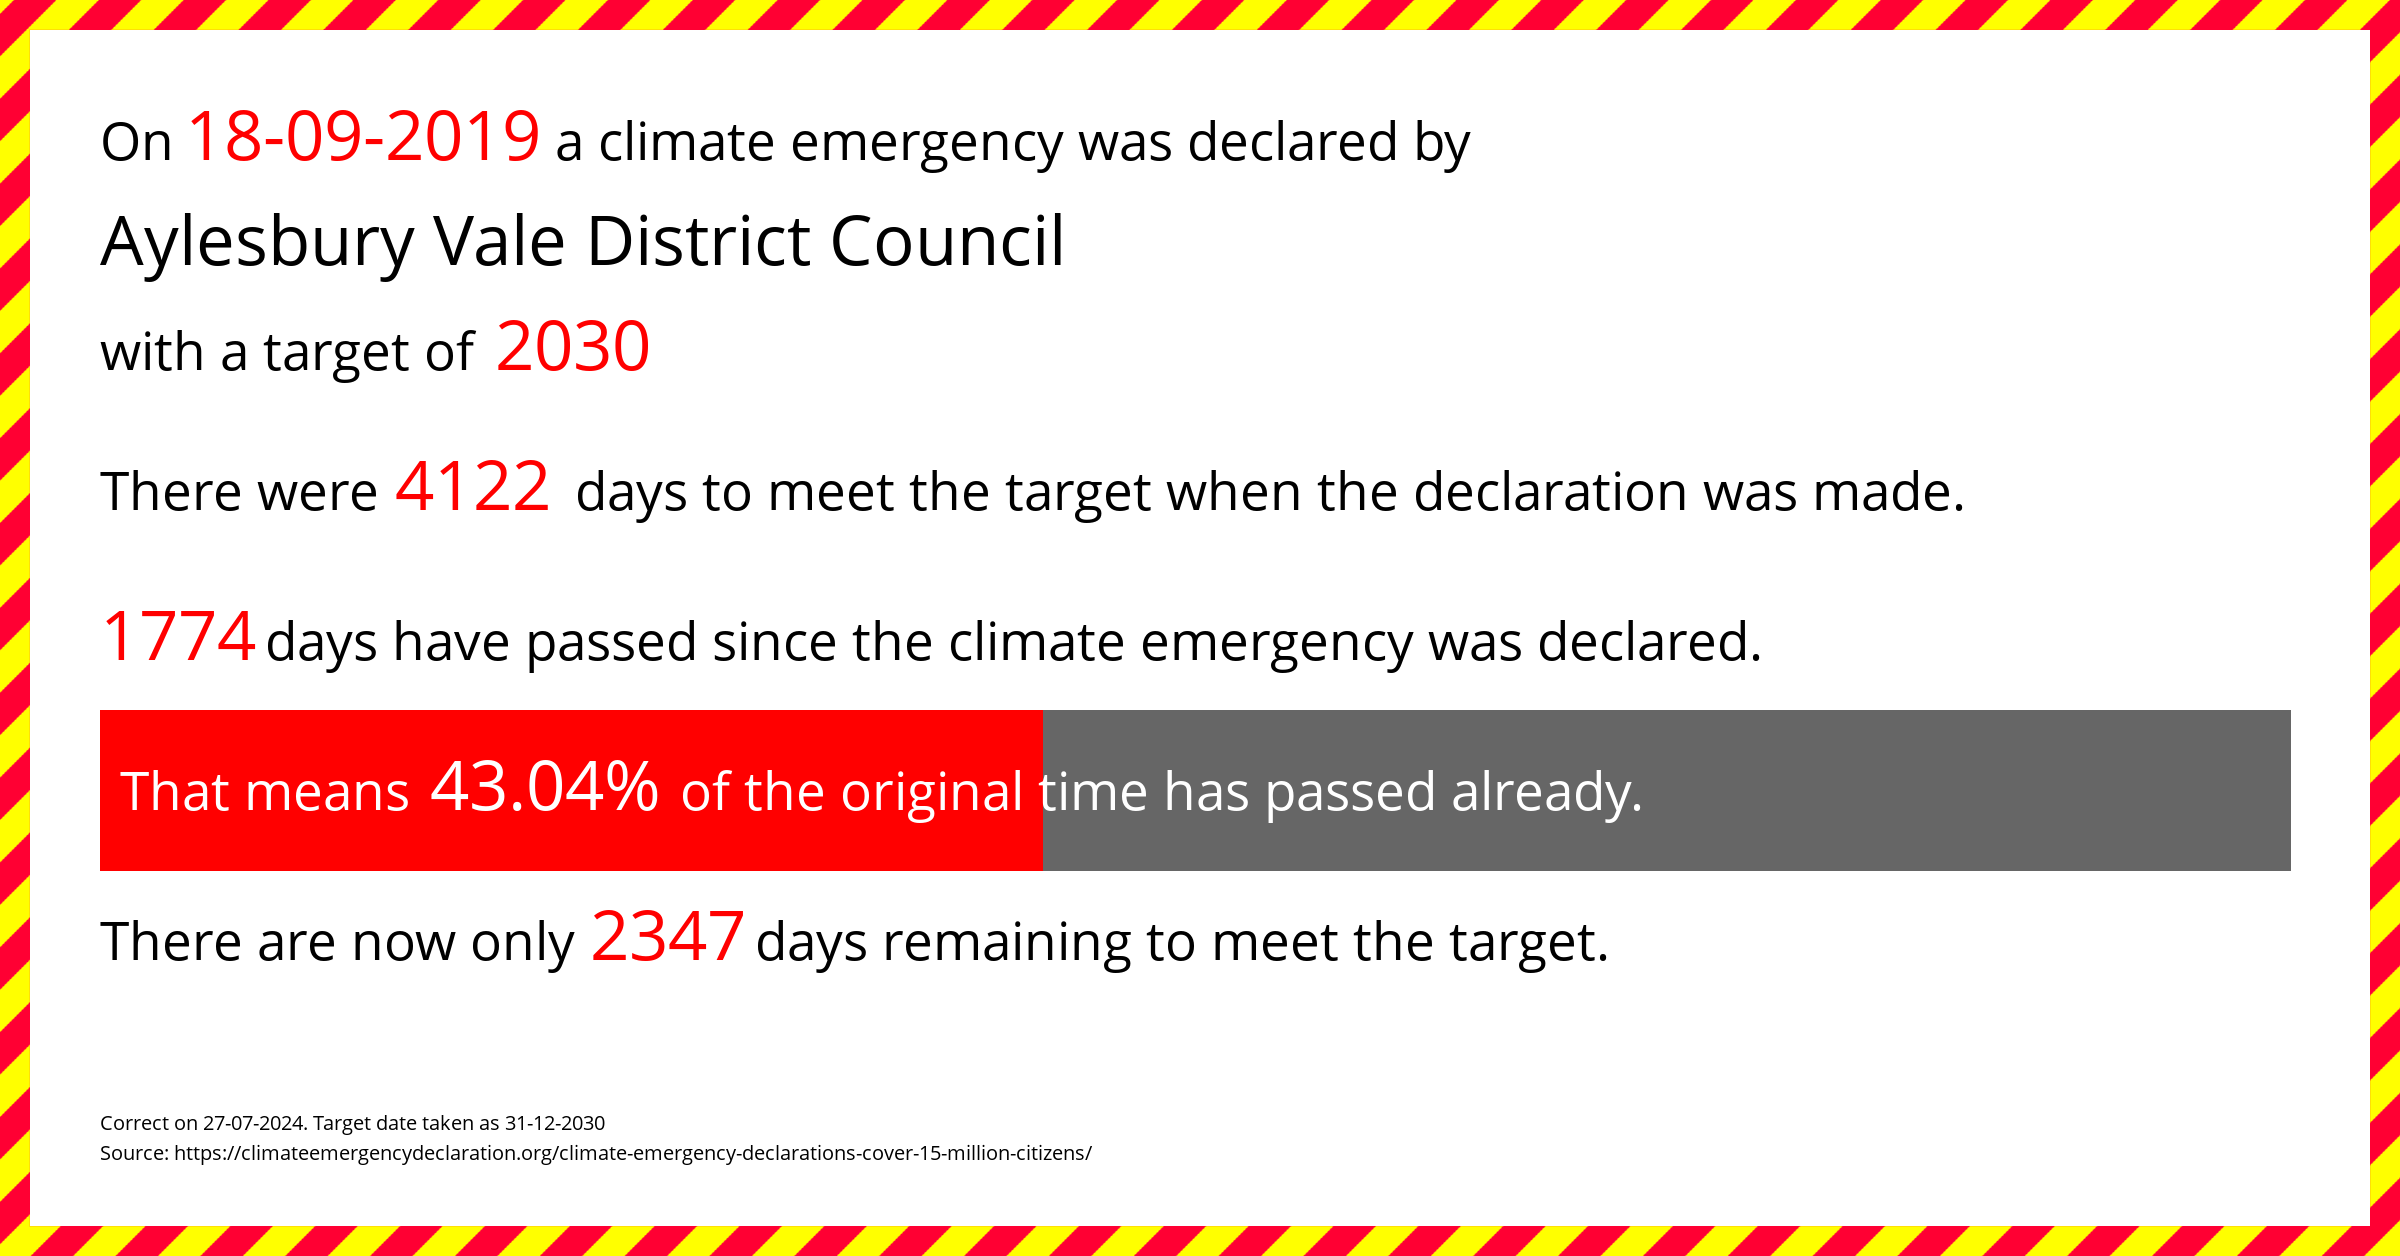 Aylesbury Vale District Council declared a Climate emergency on Wednesday 18th September 2019, with a target of 2030.